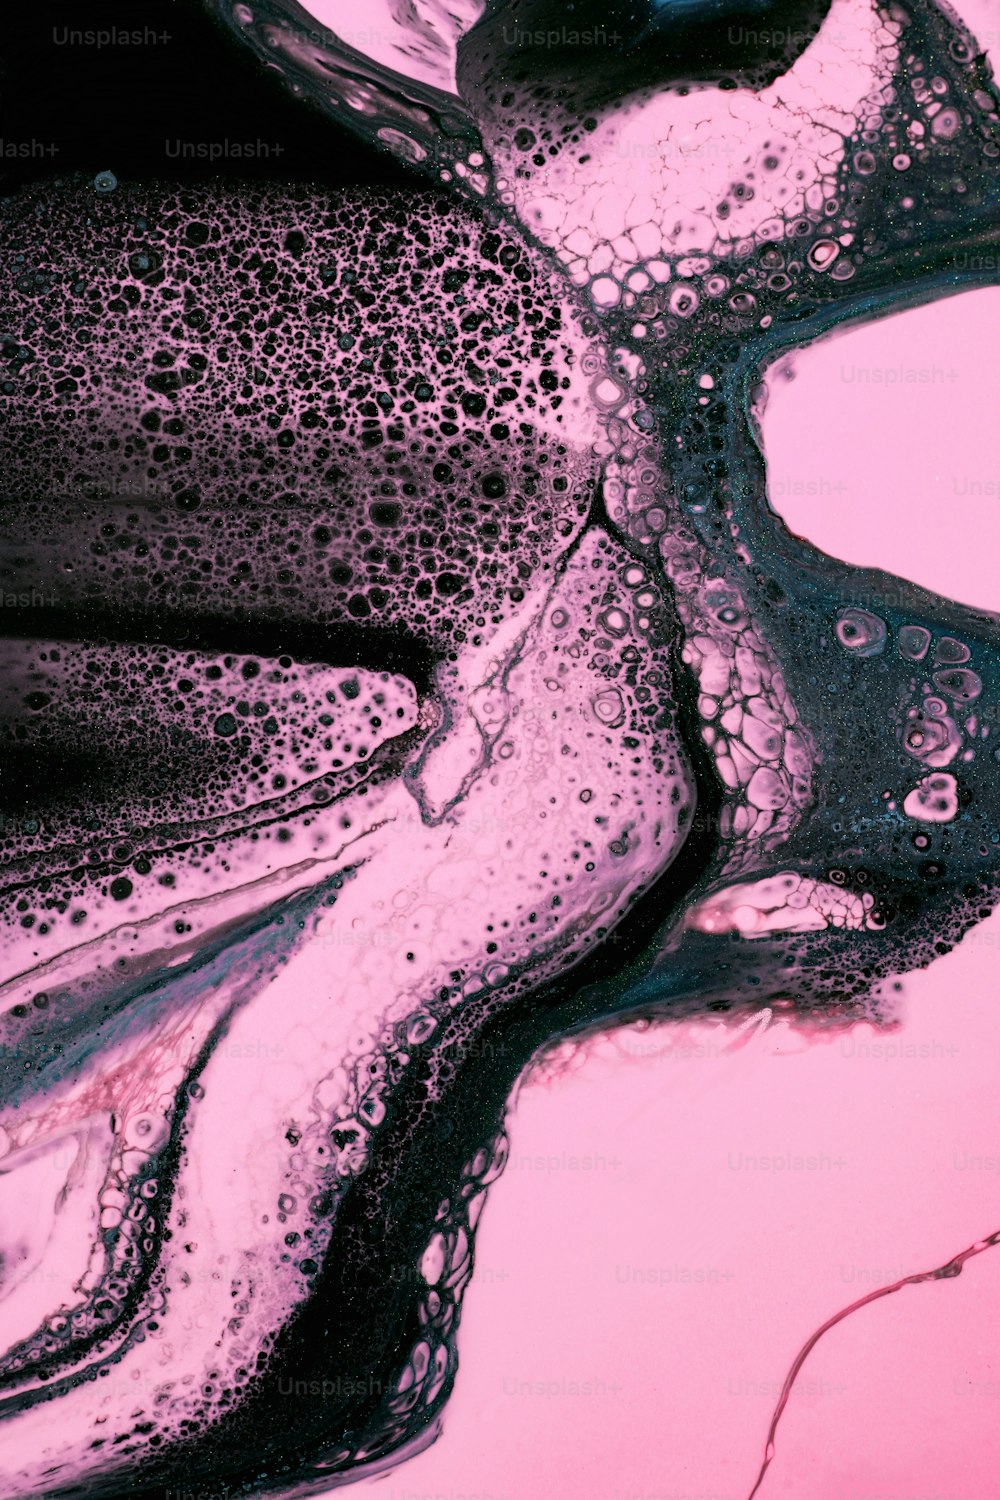 a close up of water bubbles on a pink surface